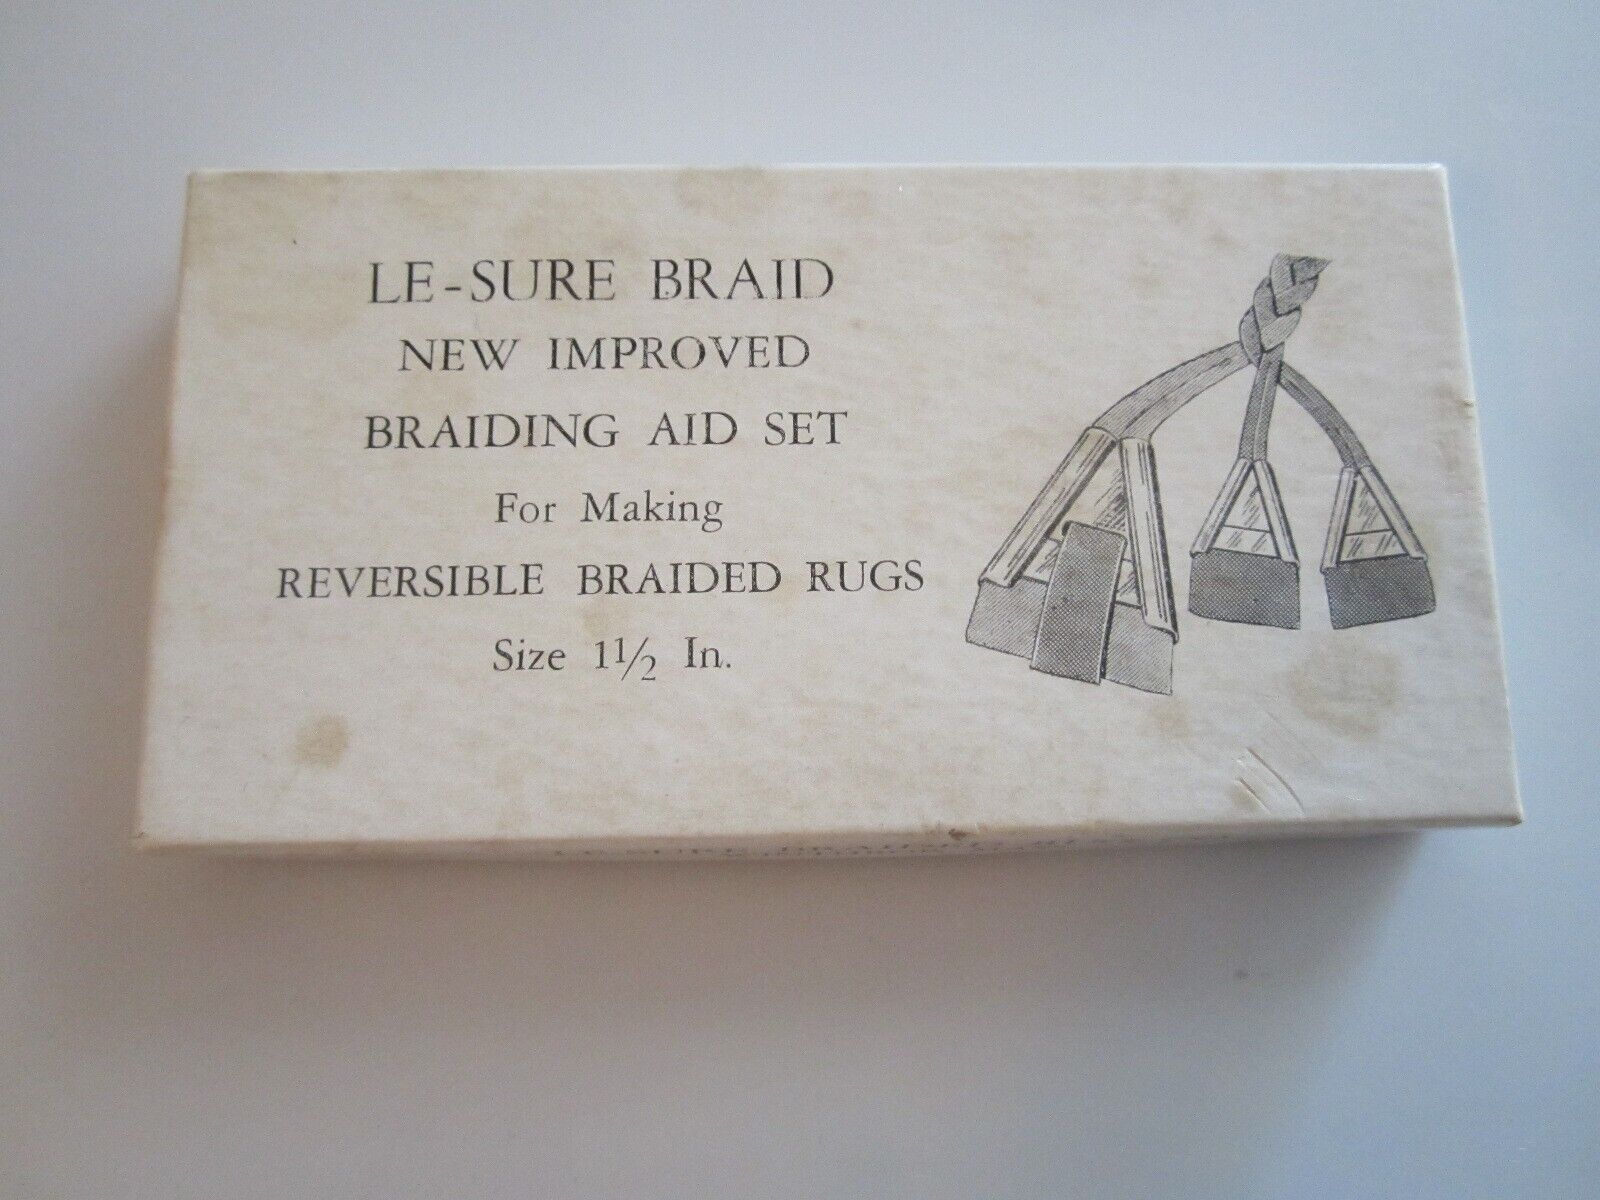 Le-sure Braid New Improved Braiding Aid Set For Making Braided Rugs 1 1/2" Used